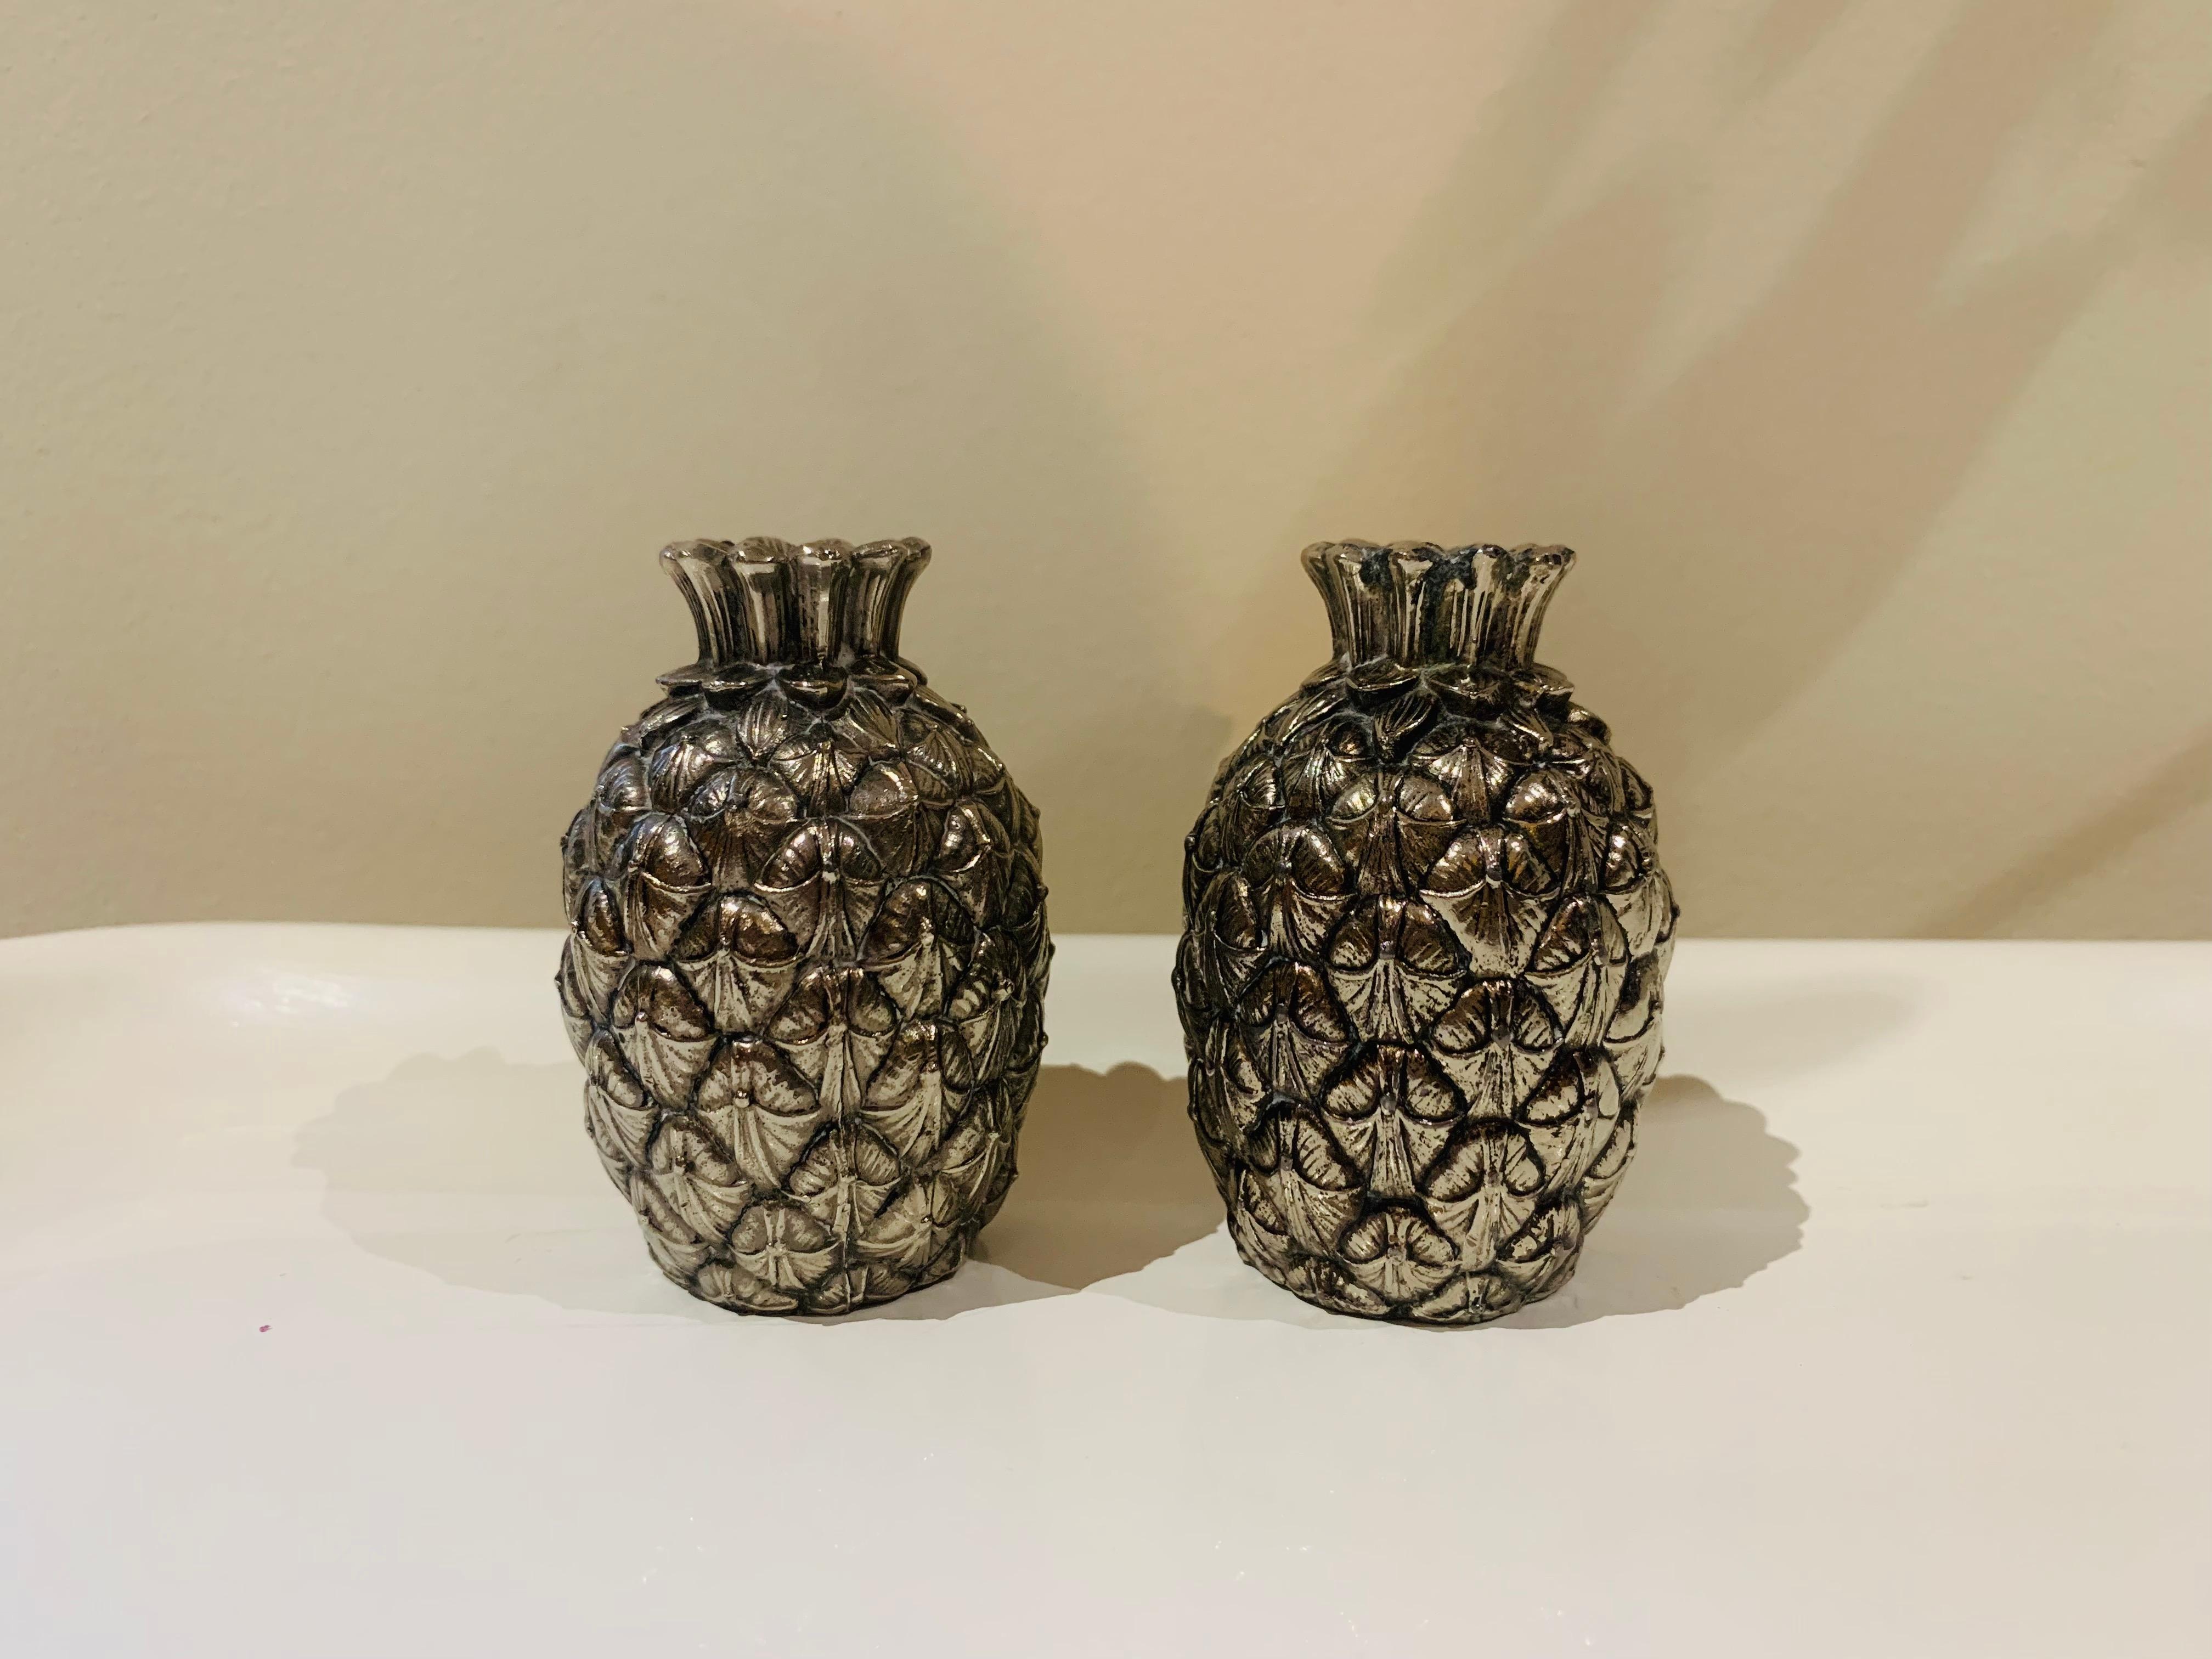 1970s Italian Mauro Manetti Firenze Silver-Plate Pineapple Salt & Pepper Shakers In Good Condition For Sale In London, GB